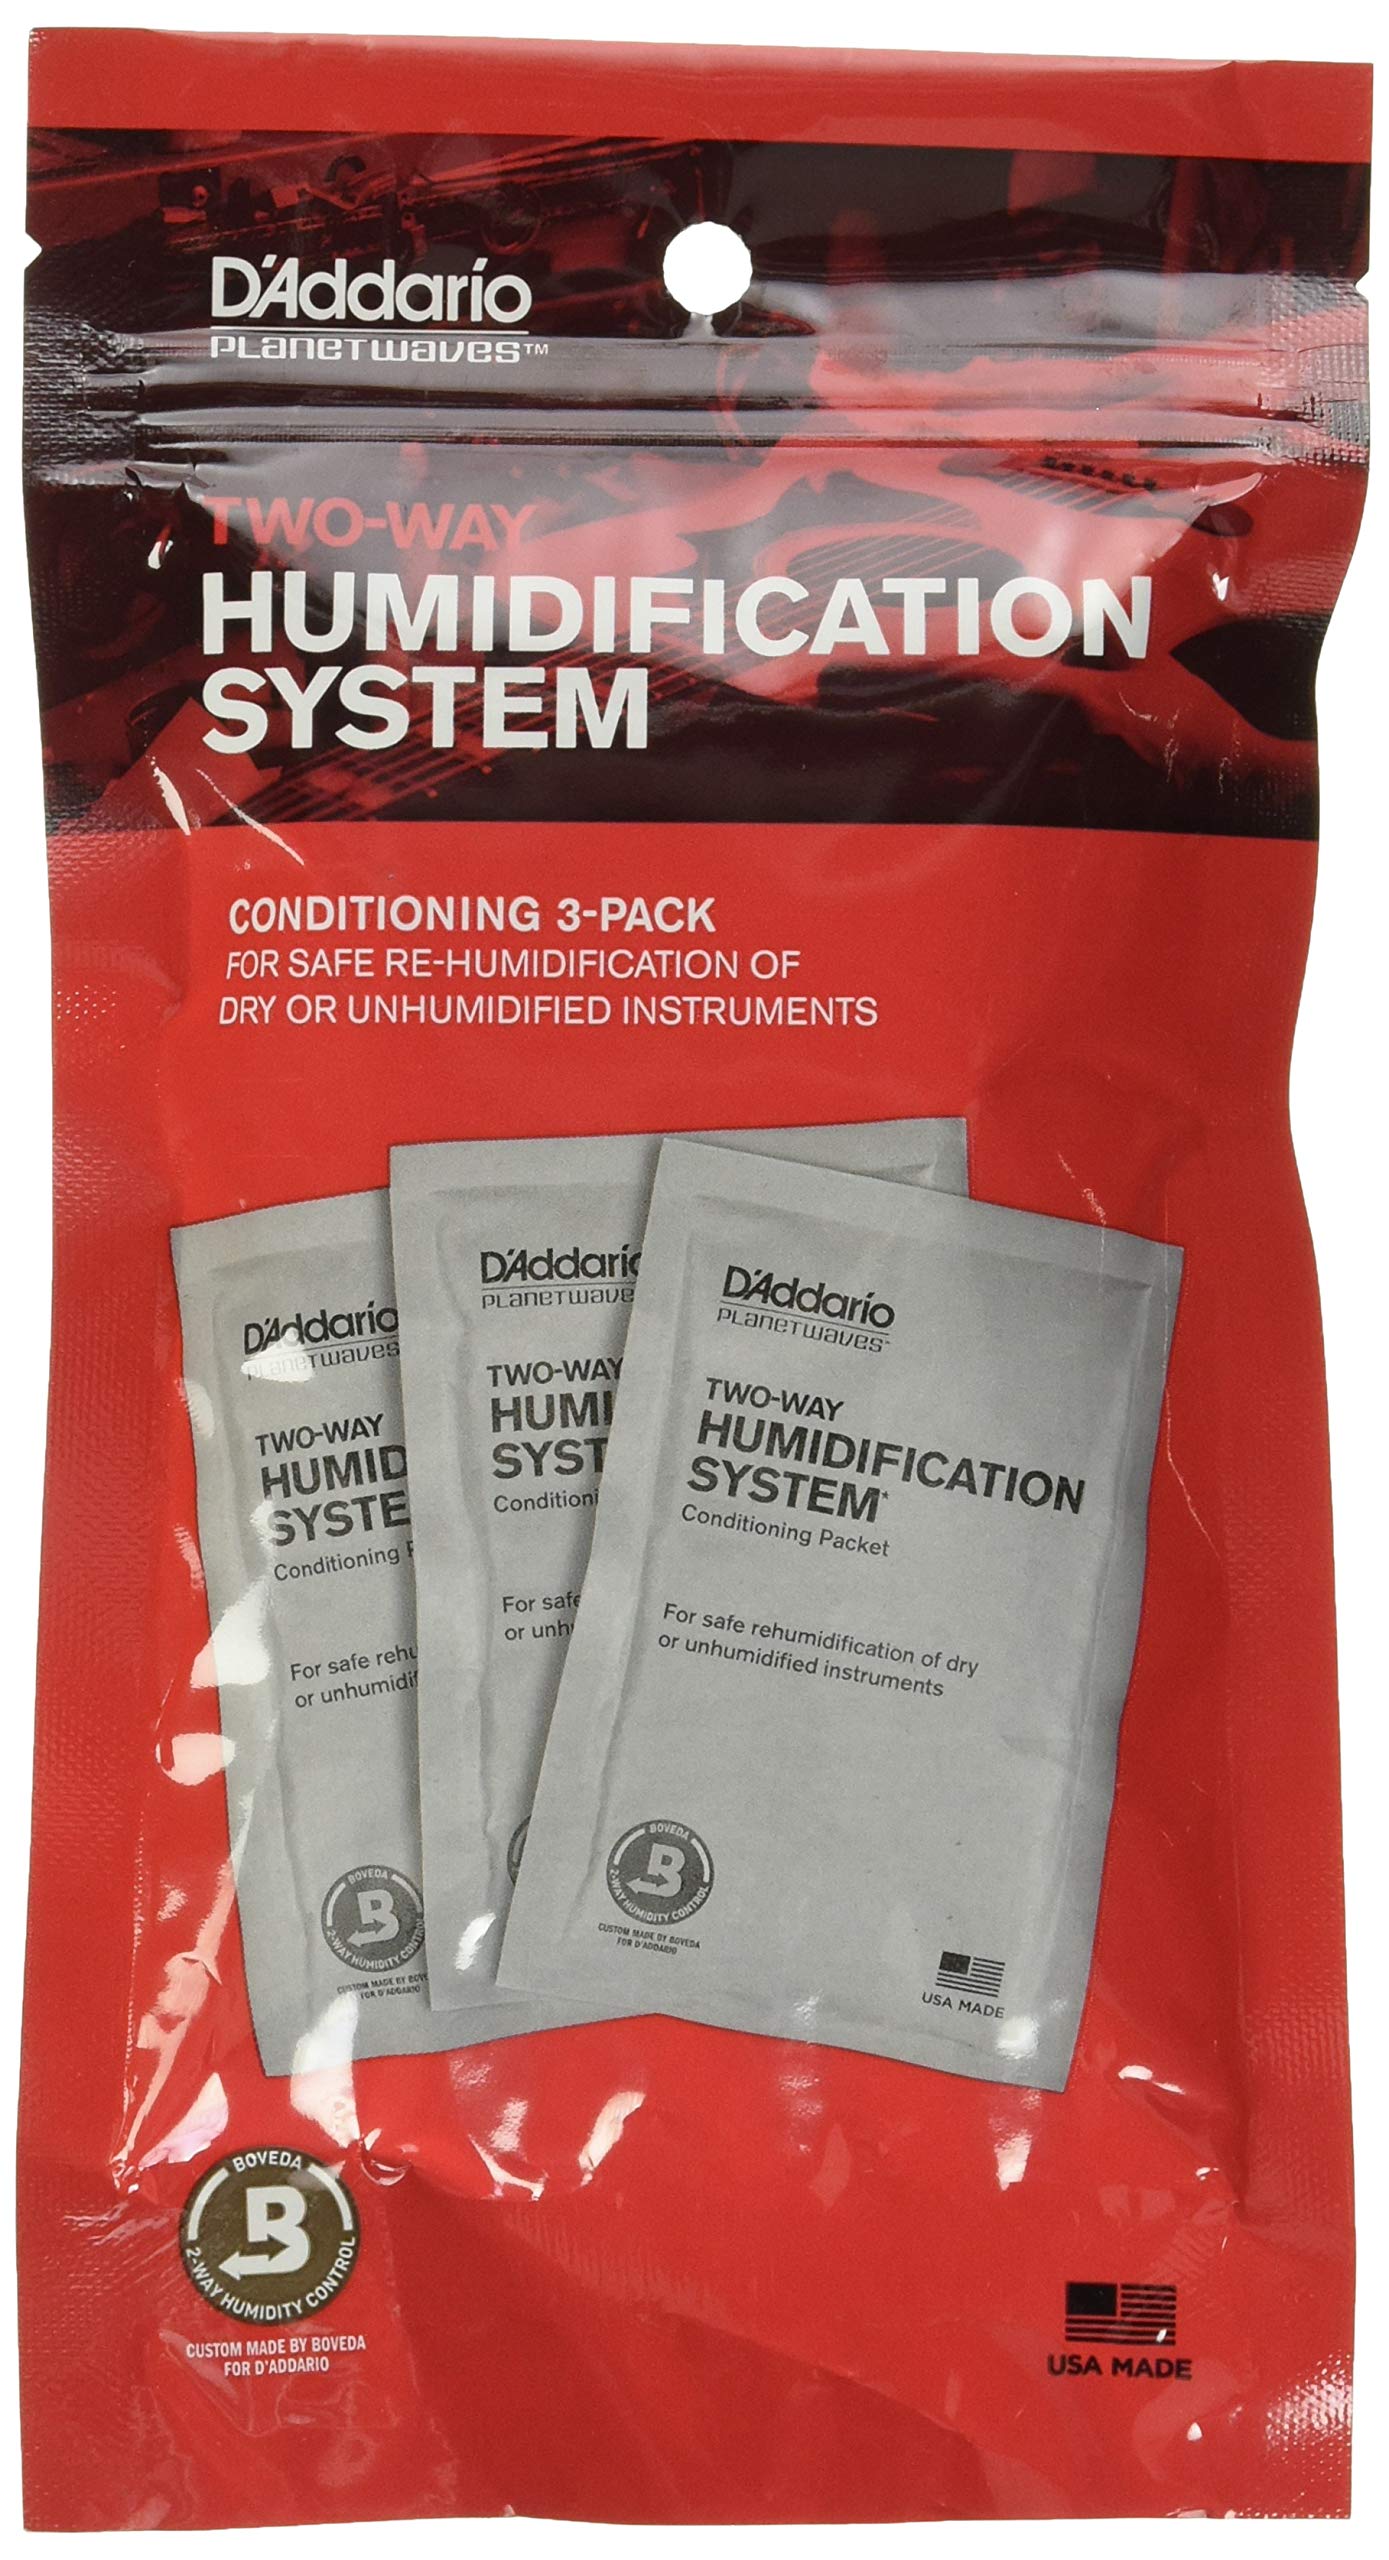 Book Cover D'Addario Guitar Humidifier Packs - Two-Way Humidification System Conditioning Packets - For Restoring to Proper Guitar Humidification Level - 3 Restore Conditioning Packets Restore Conditioning Packets - 3-pack